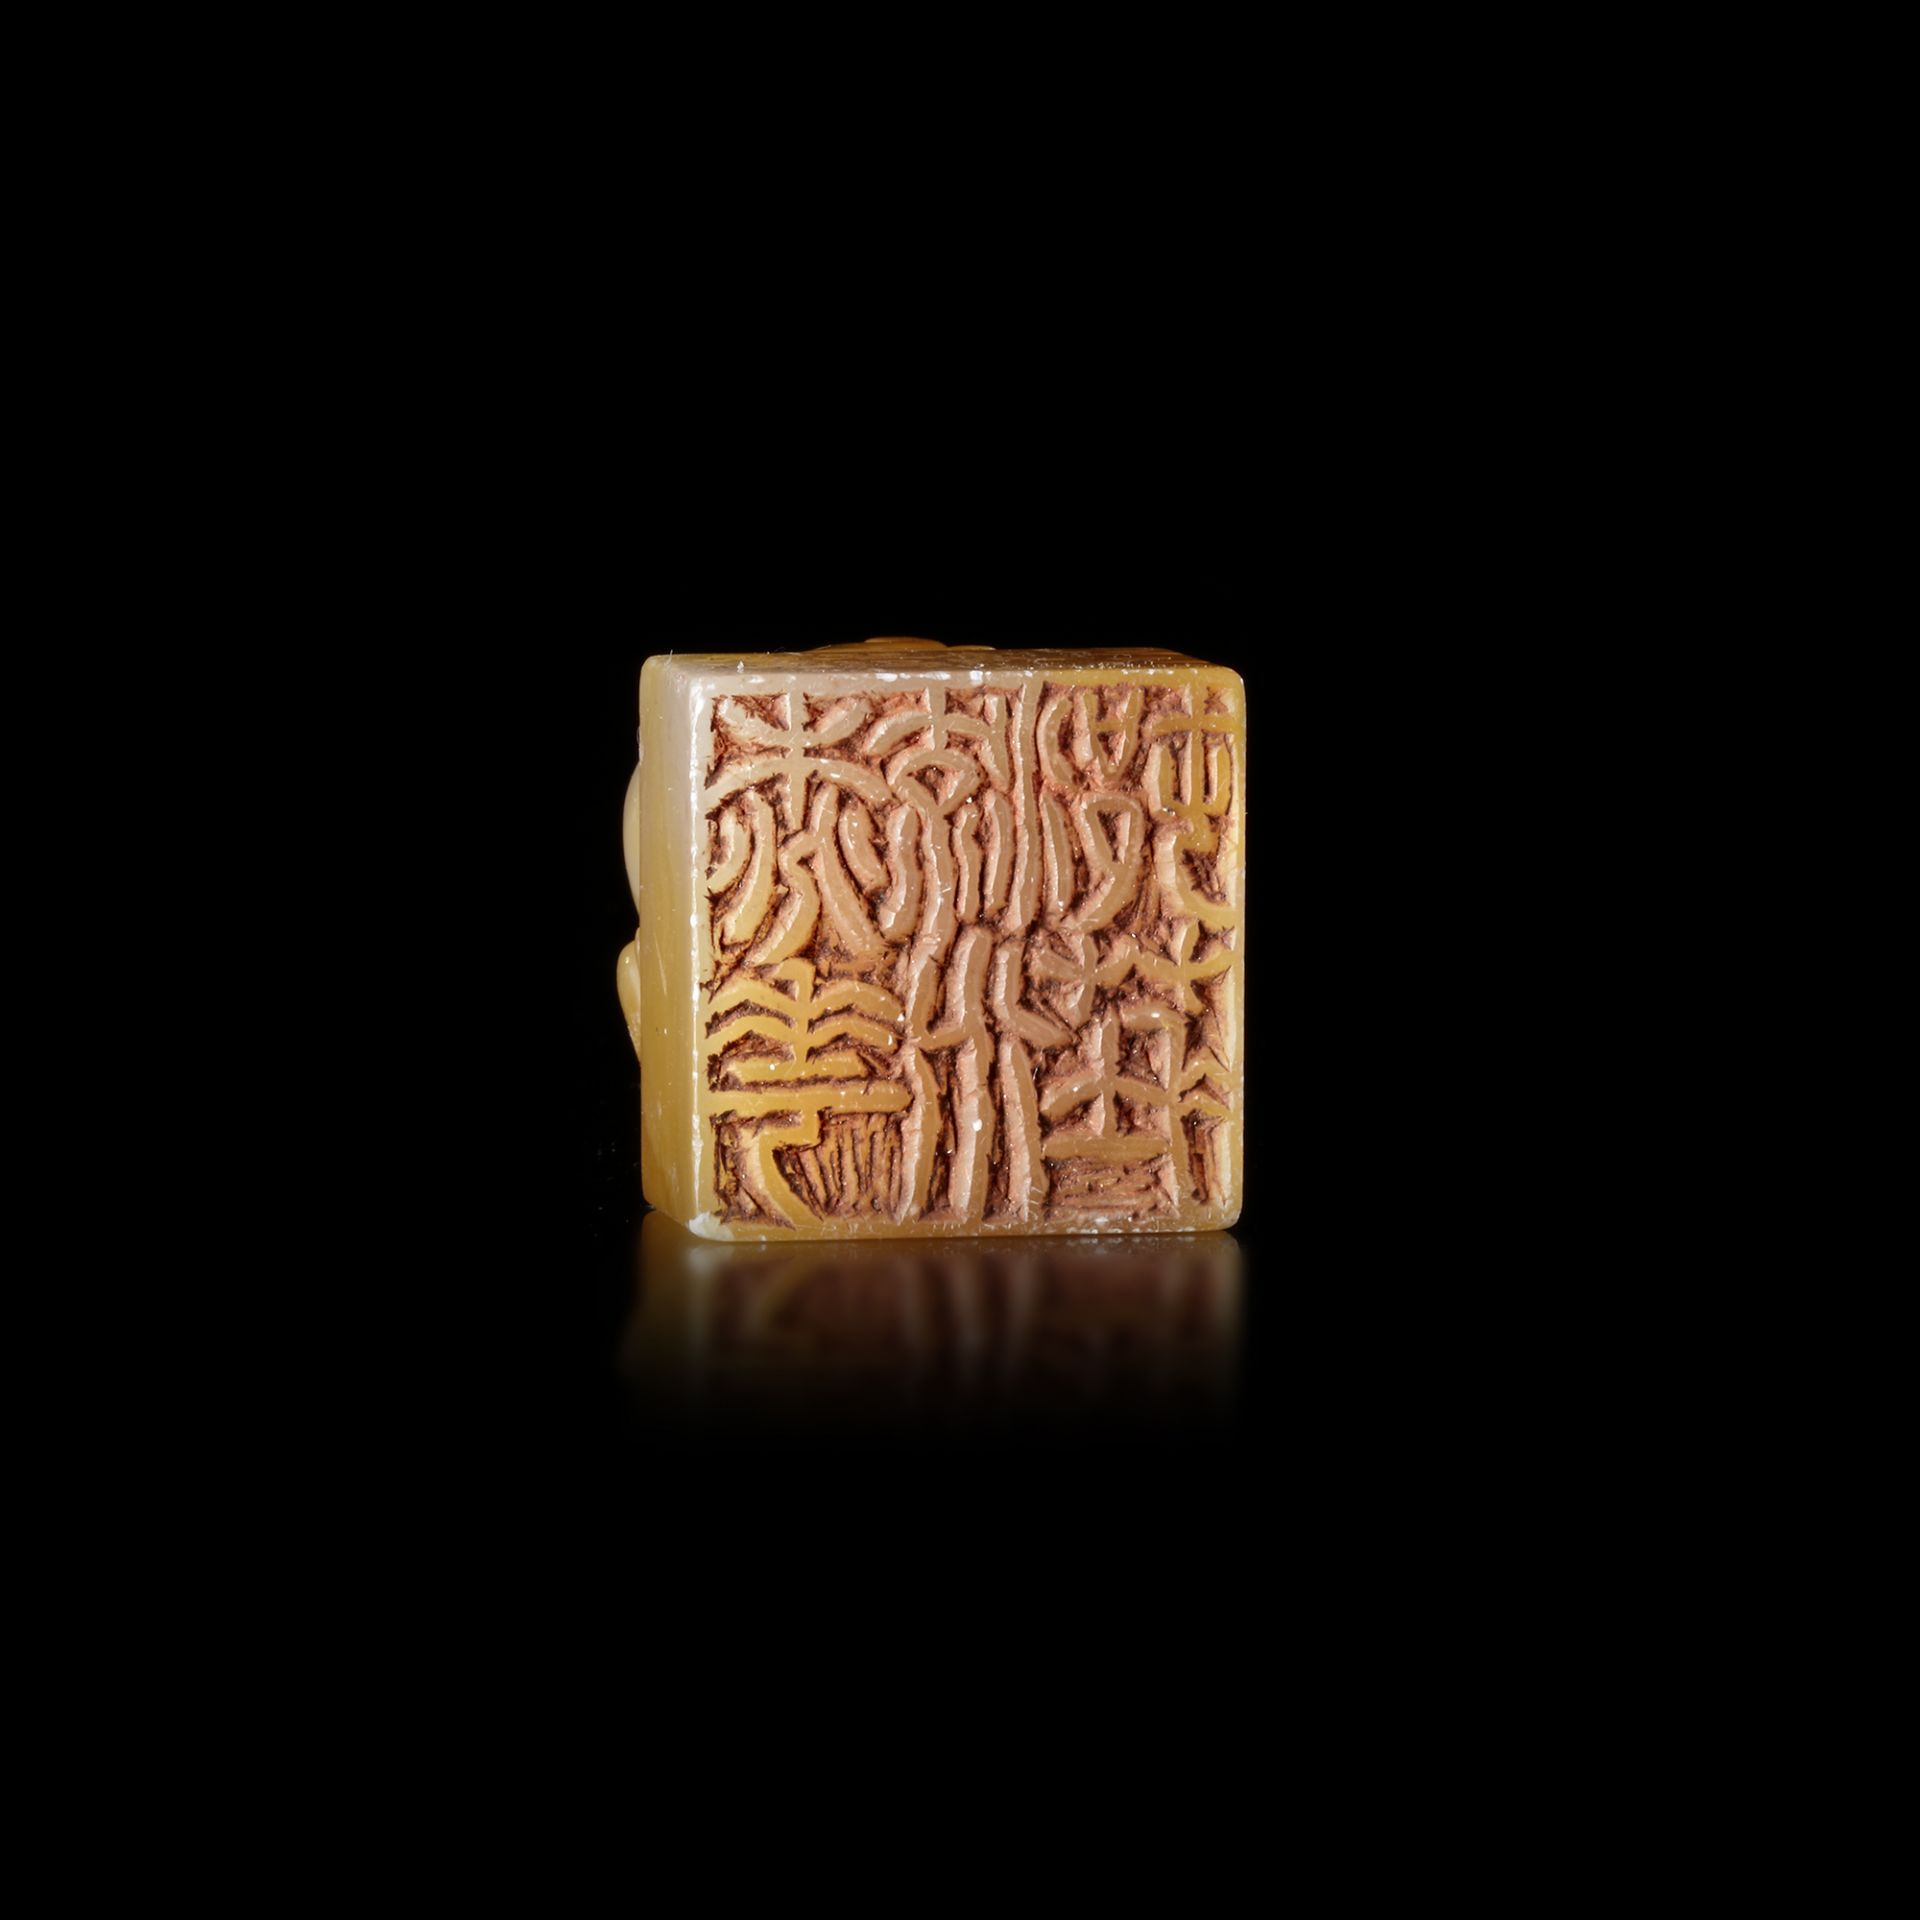 A CHINESE CARVED 'LION' TIANHUANG SEAL, QING DYNASTY (1644-1911) - Image 3 of 3